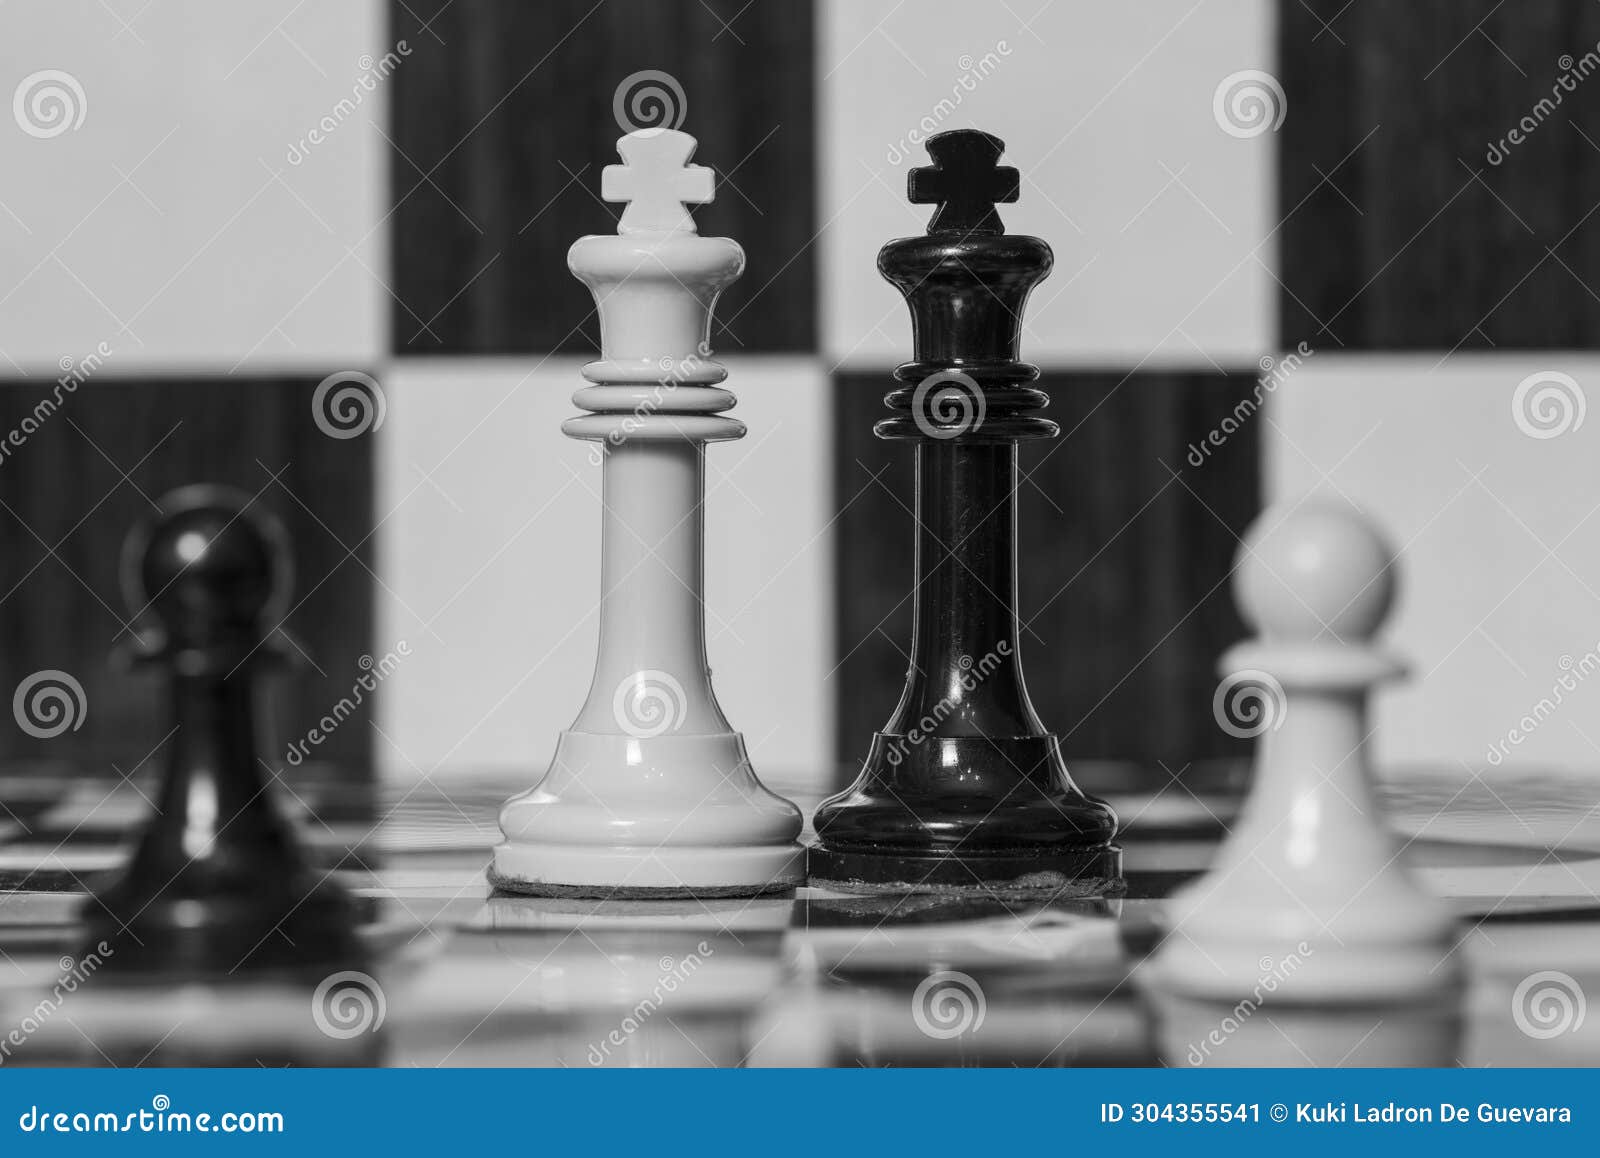 chess pieces, black and white king, on a board